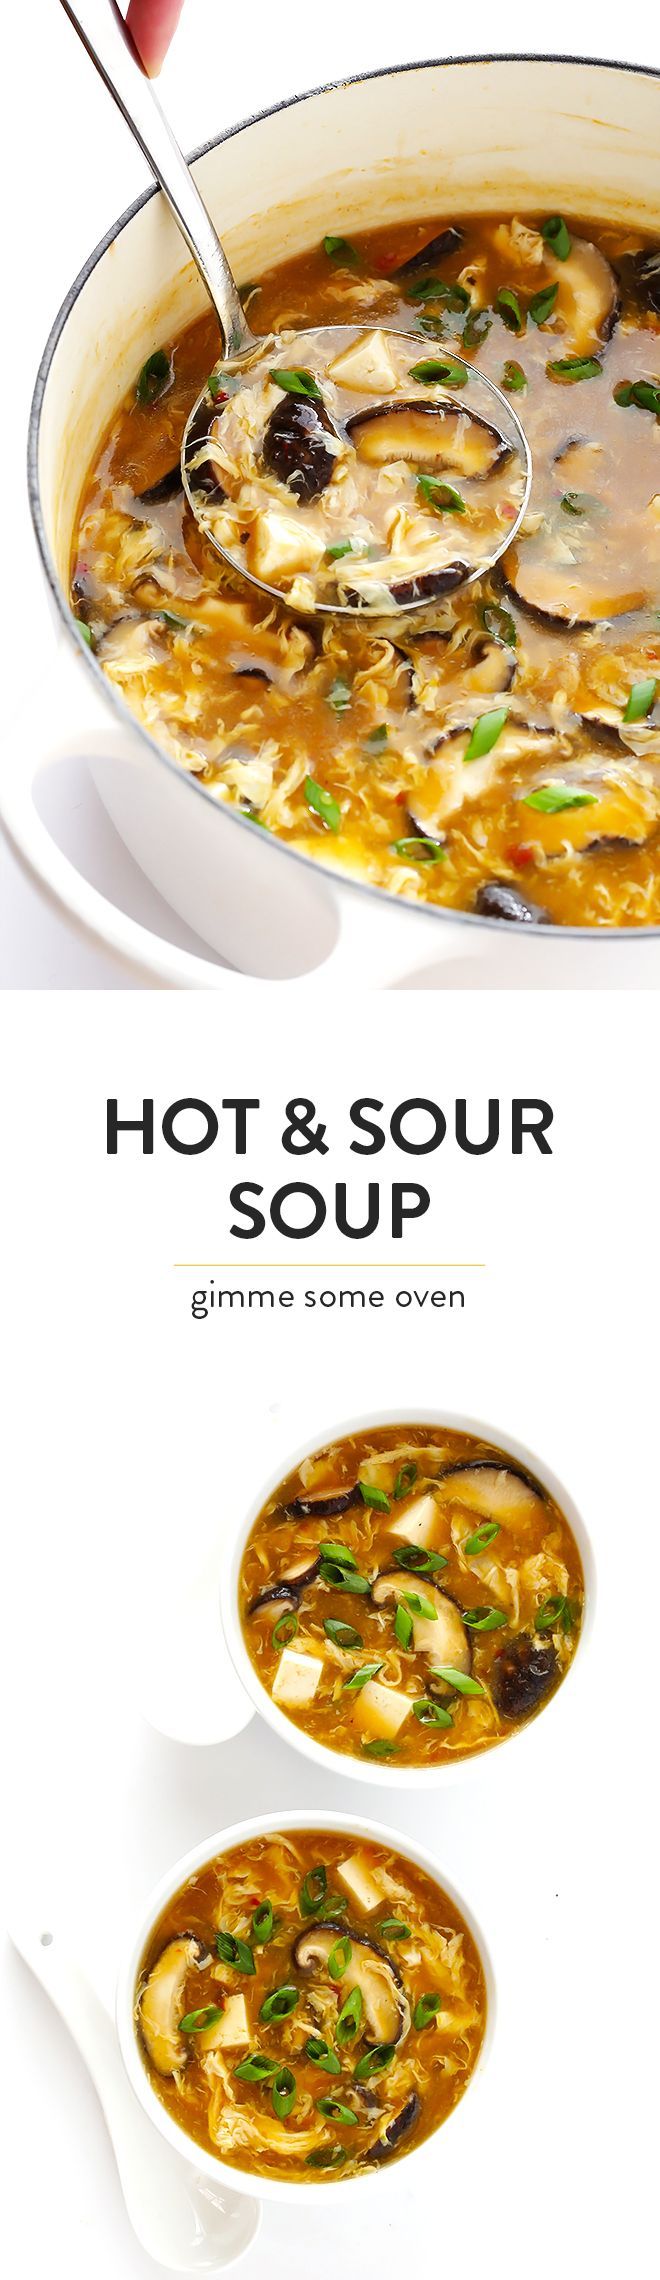 This Hot and Sour Soup recipe is quick and easy to make, SO tasty and flavorful, and tastes just like the Chinese restaurant